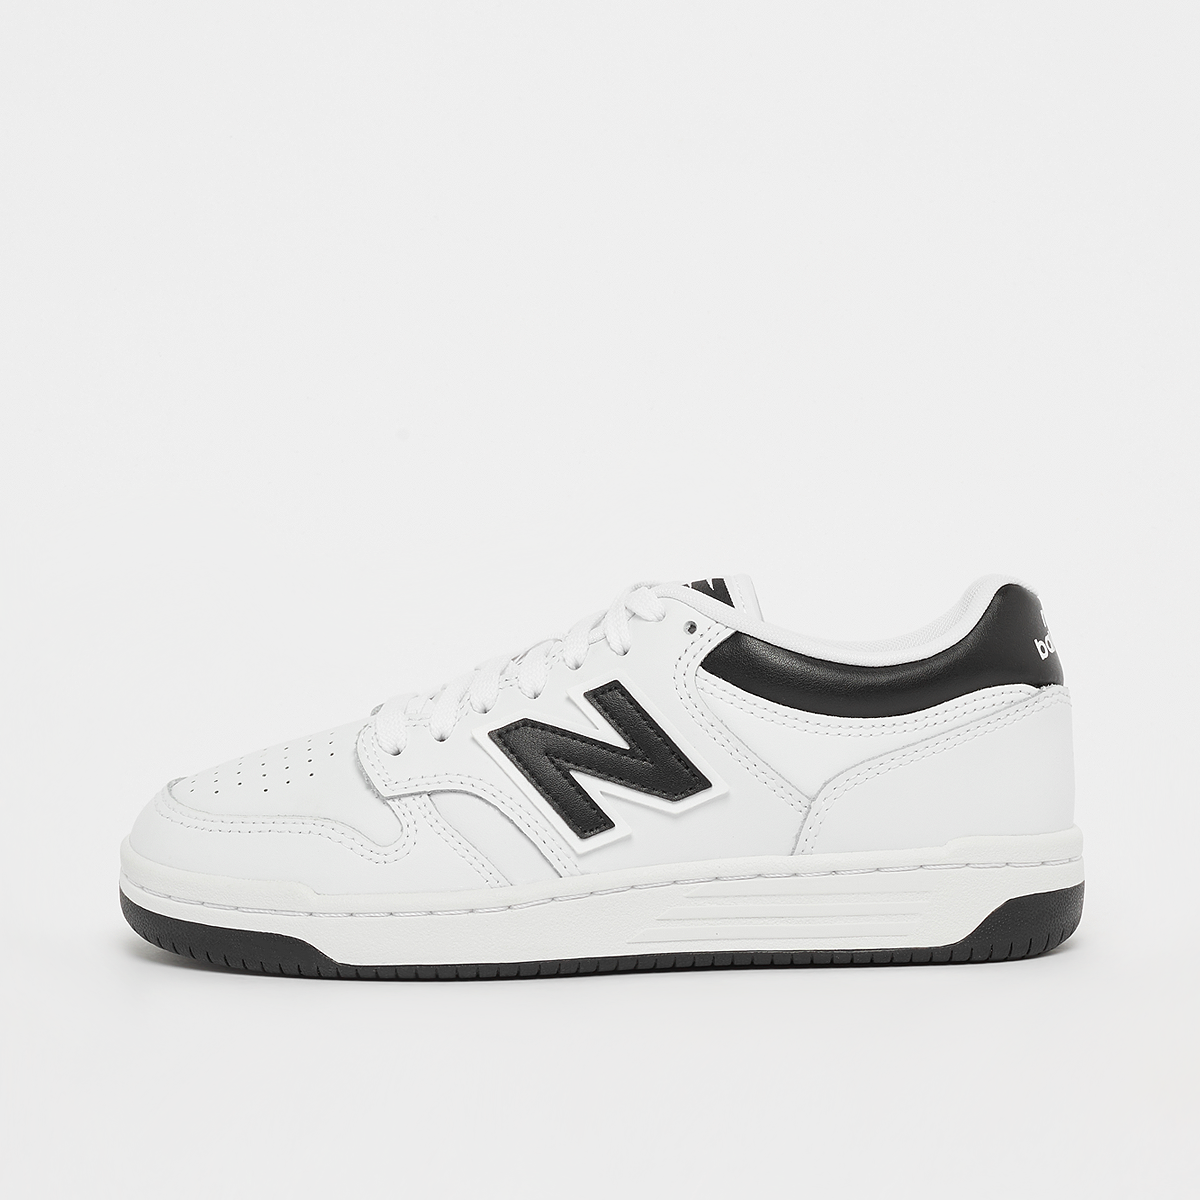 480L, New Balance, Footwear, white/black, taille: 37